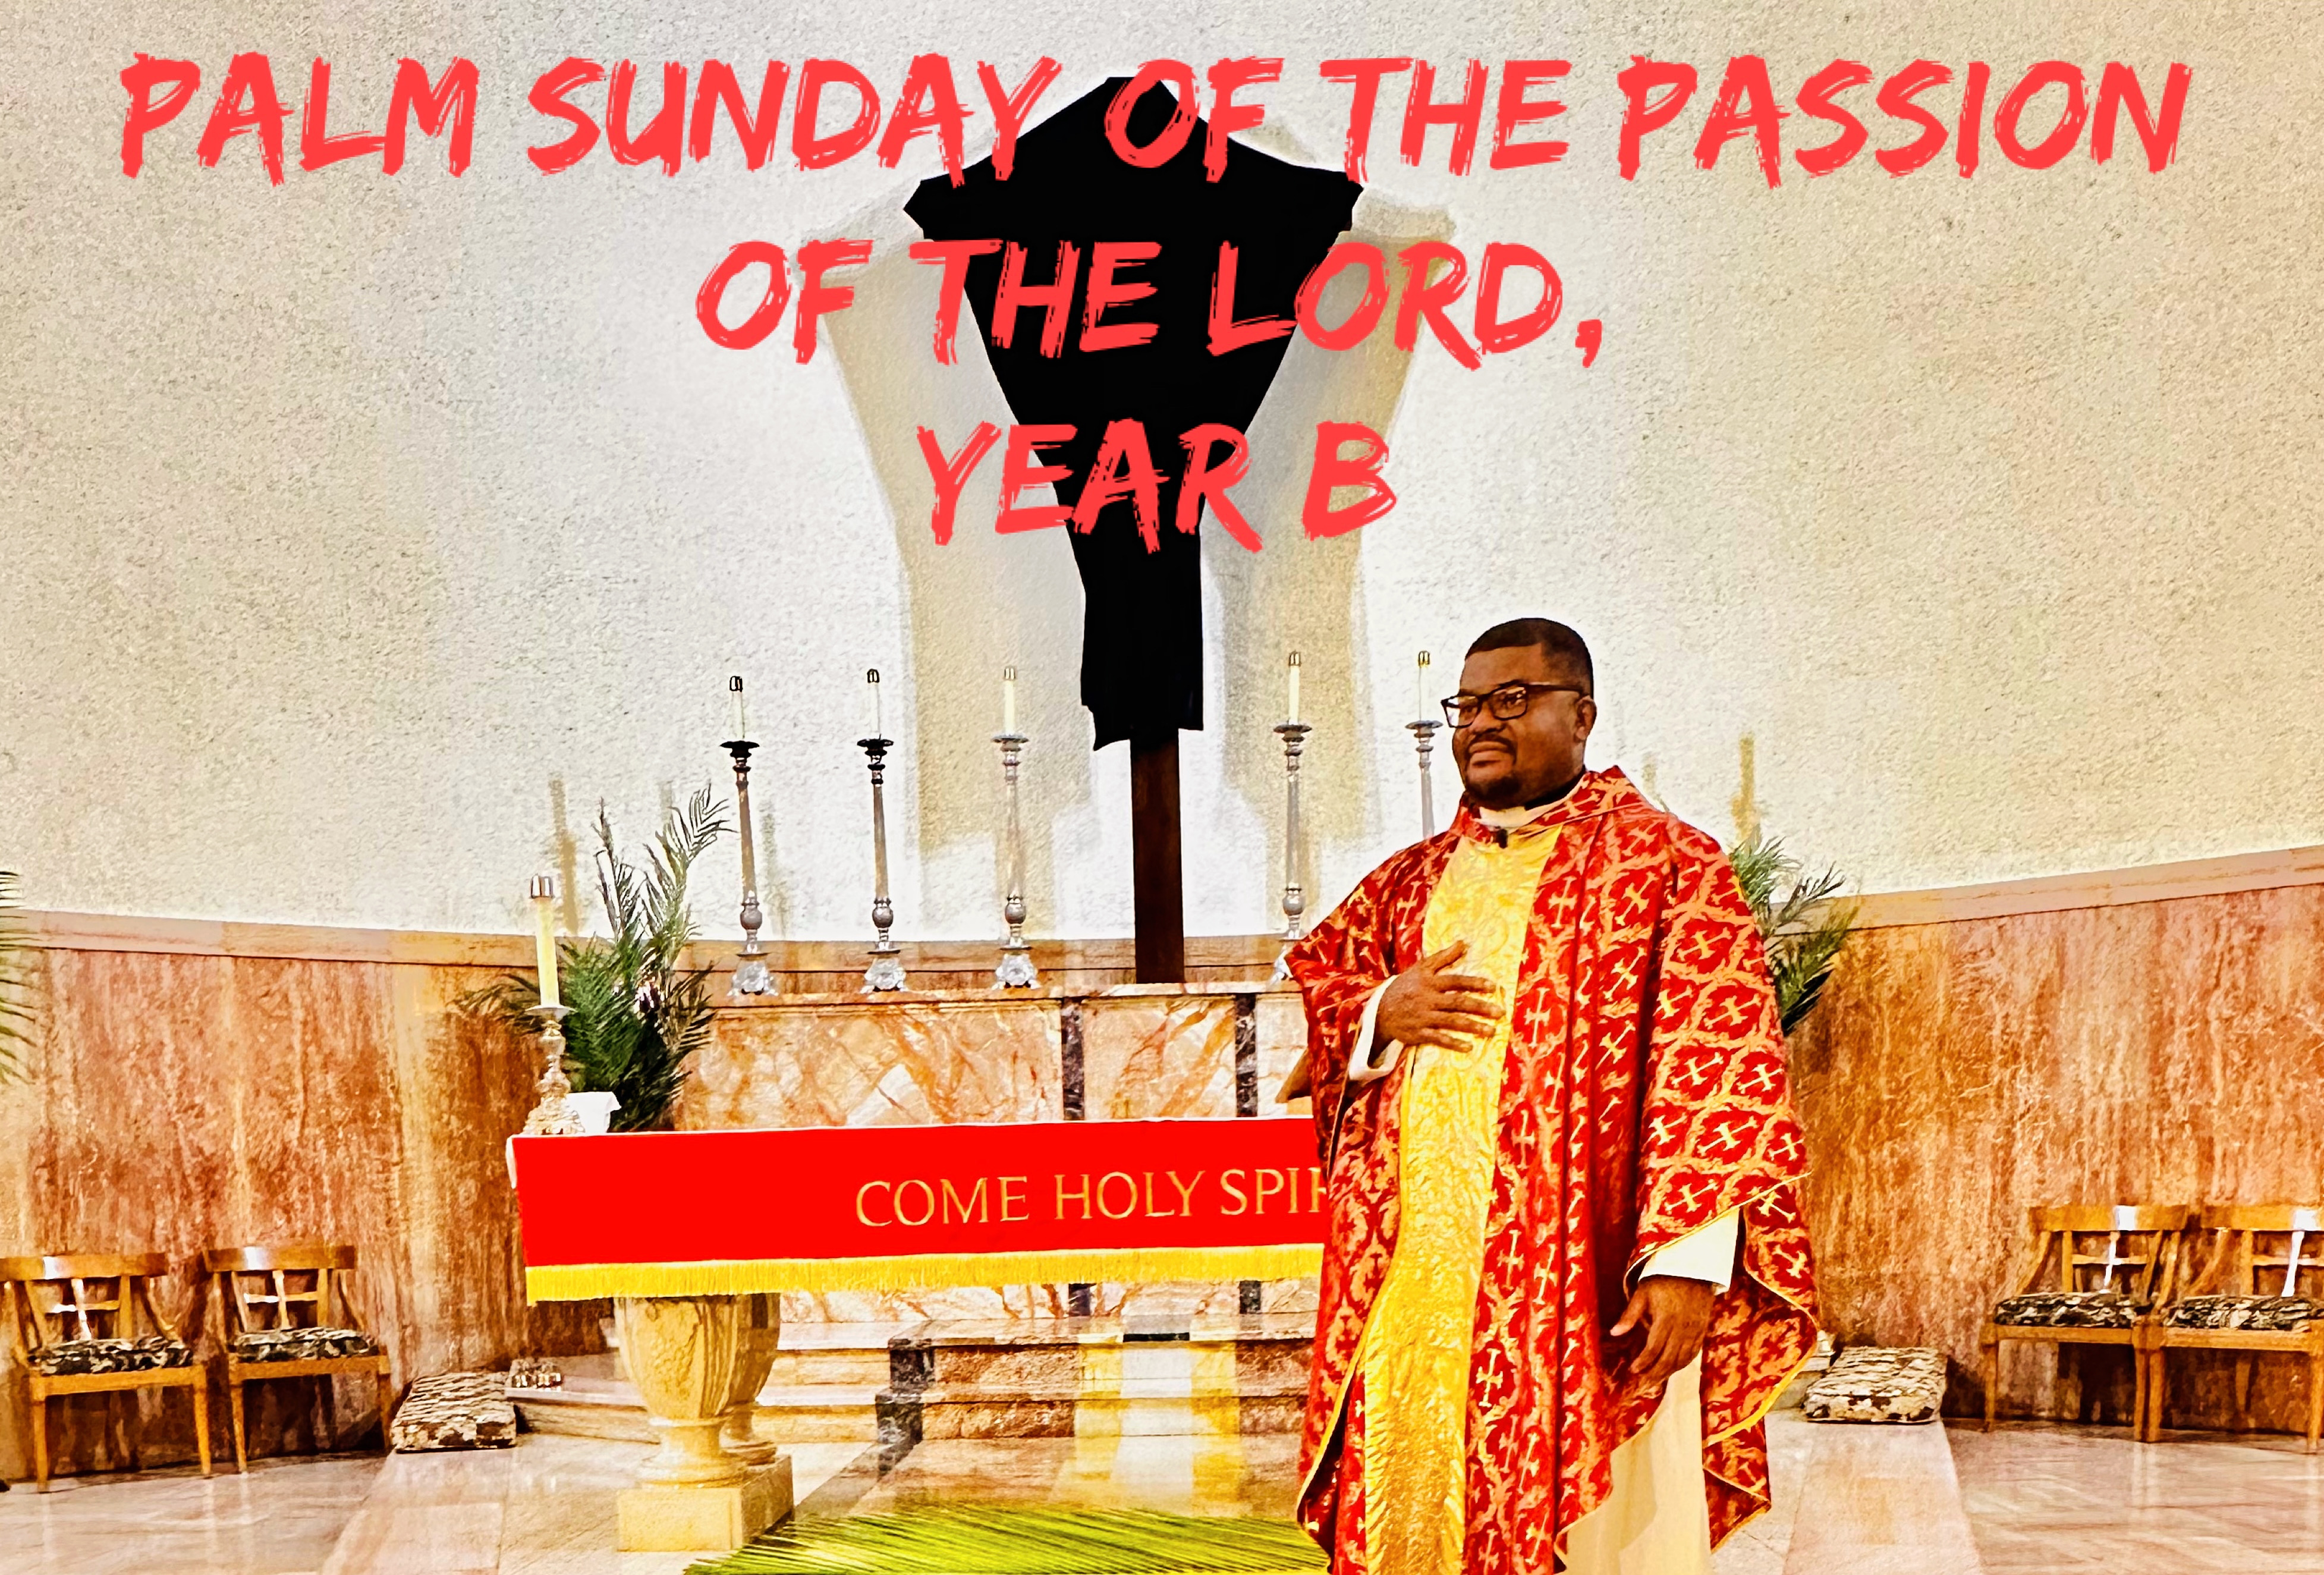 Palm Sunday of the Passion of the Lord, Year B